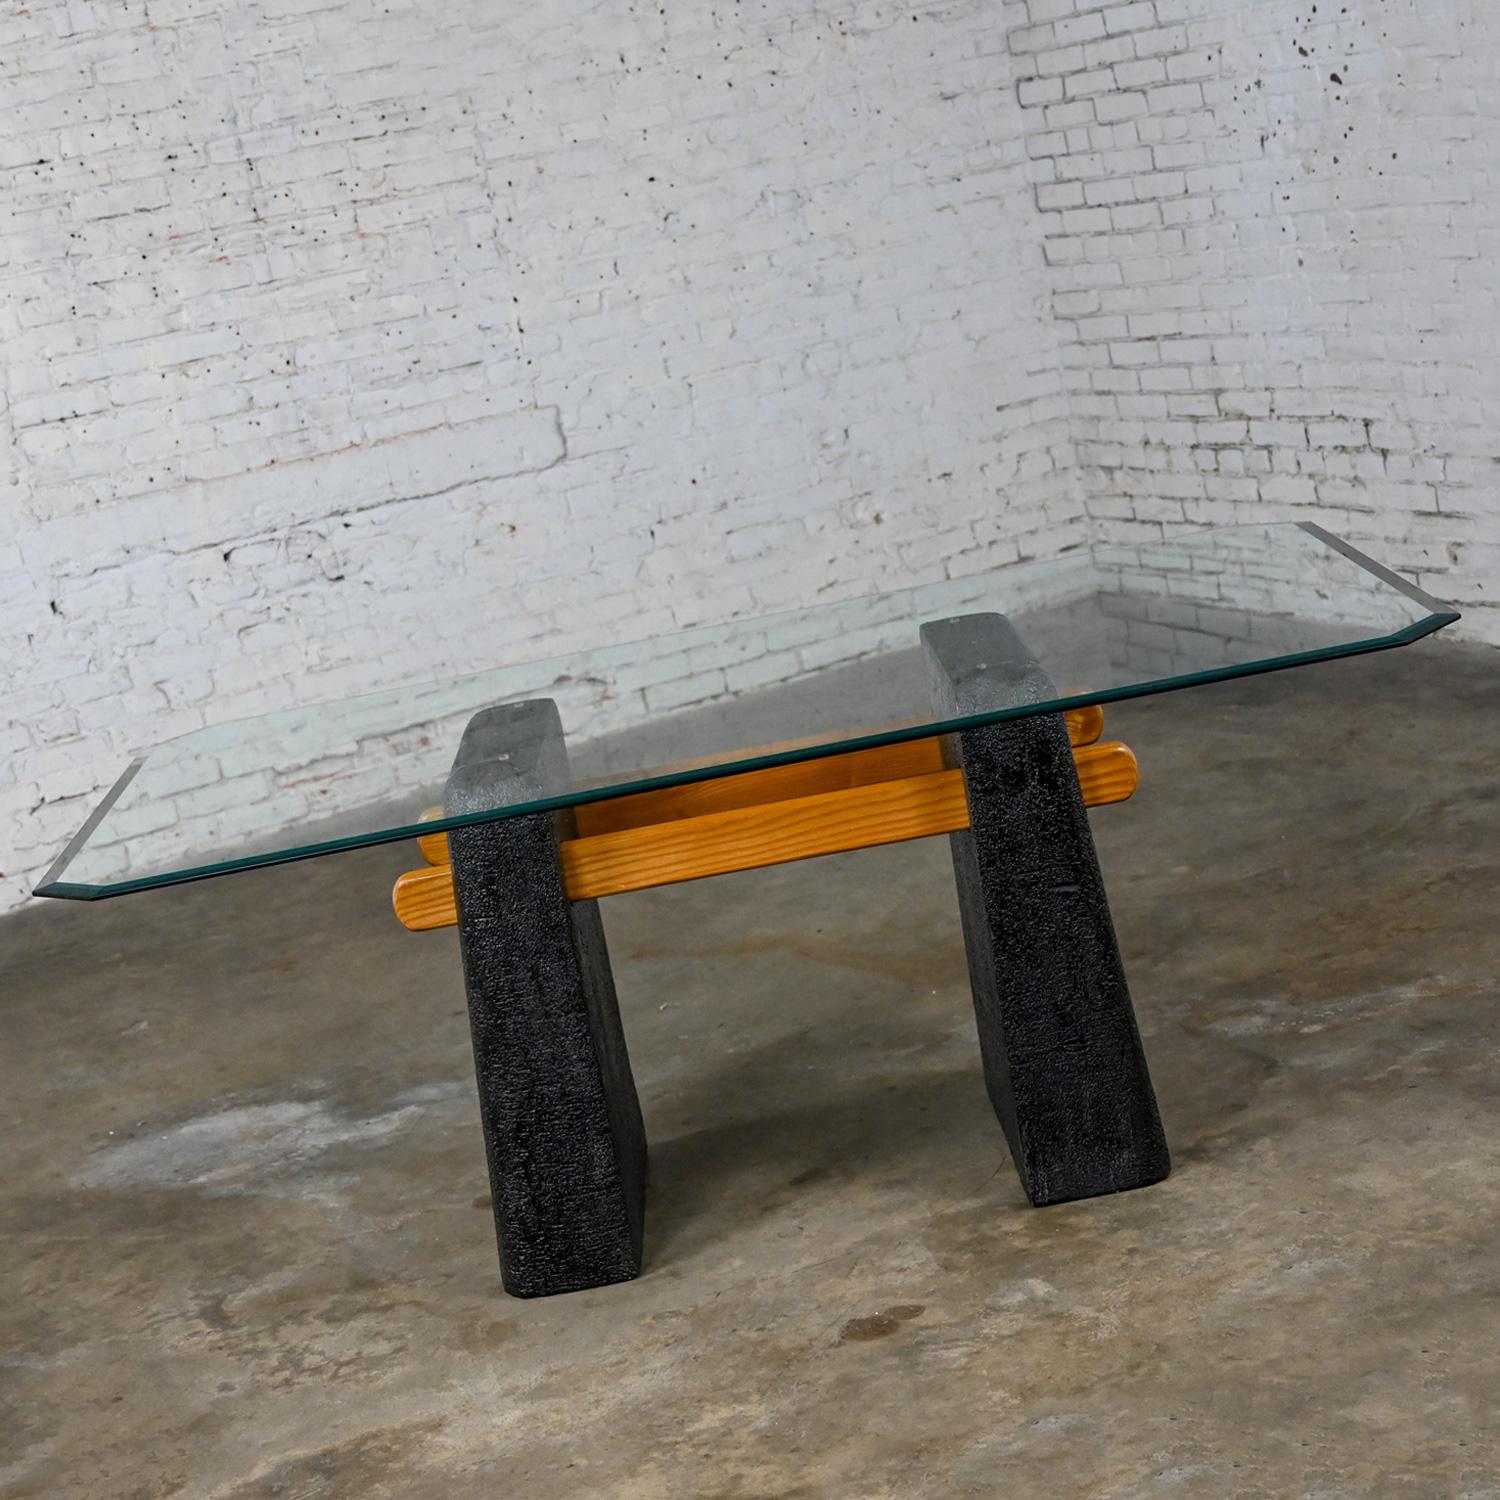 Handsome vintage Postmodern Architectural dining table comprised of a molded plaster double pedestal base with a black stucco textured finish, solid oak cross bars, and a rectangular 1 ¼” beveled 3/8” thick glass top with angled corners. Beautiful